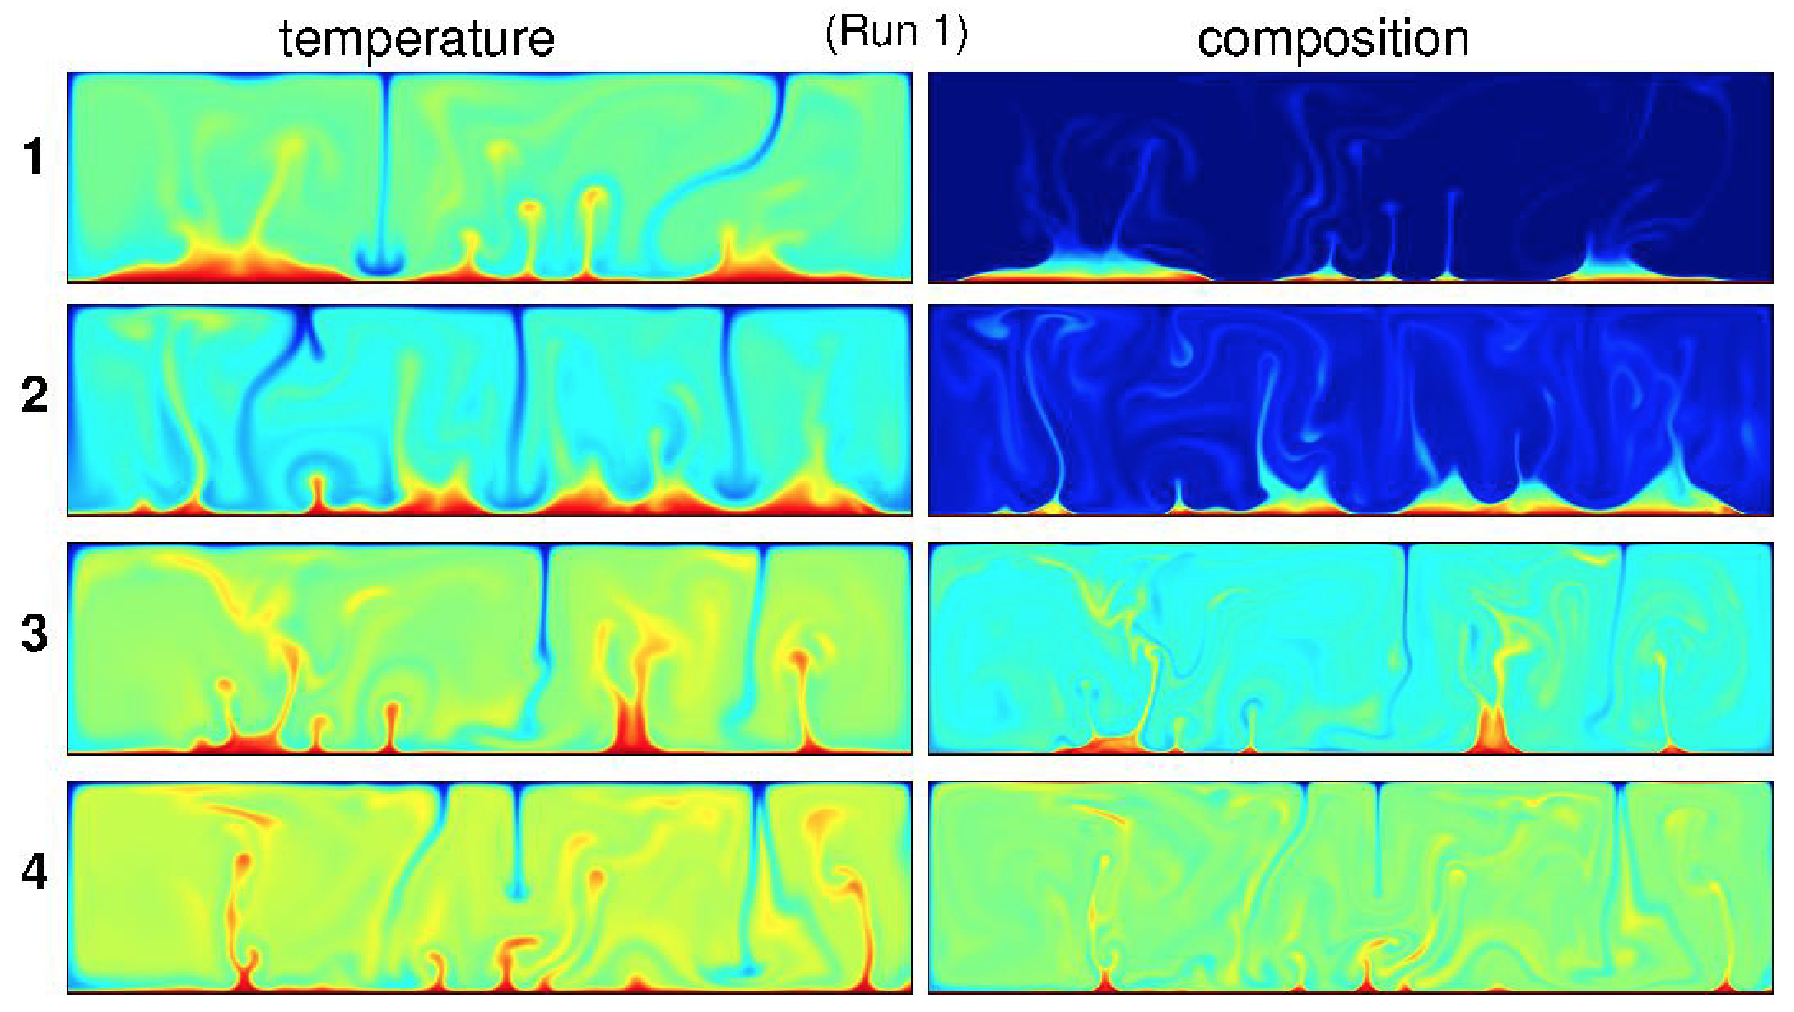 Temporal evolution of the temperature and compositional field for a model with core-mantle interaction